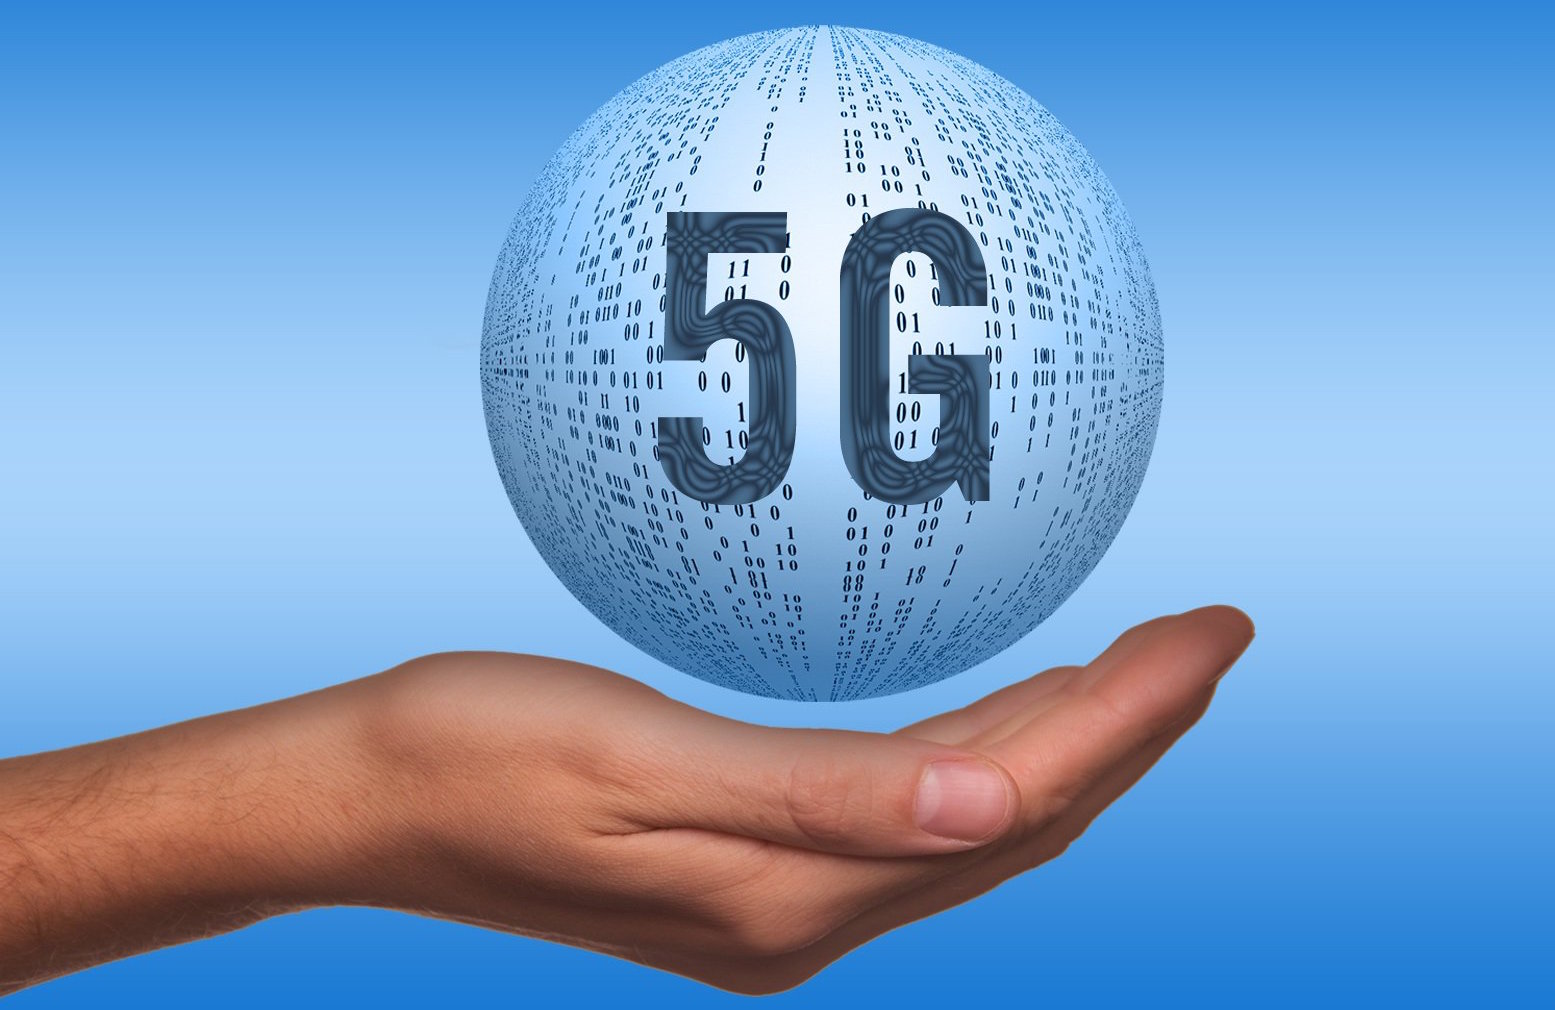 5G Qualcomm: are we ready for the future?